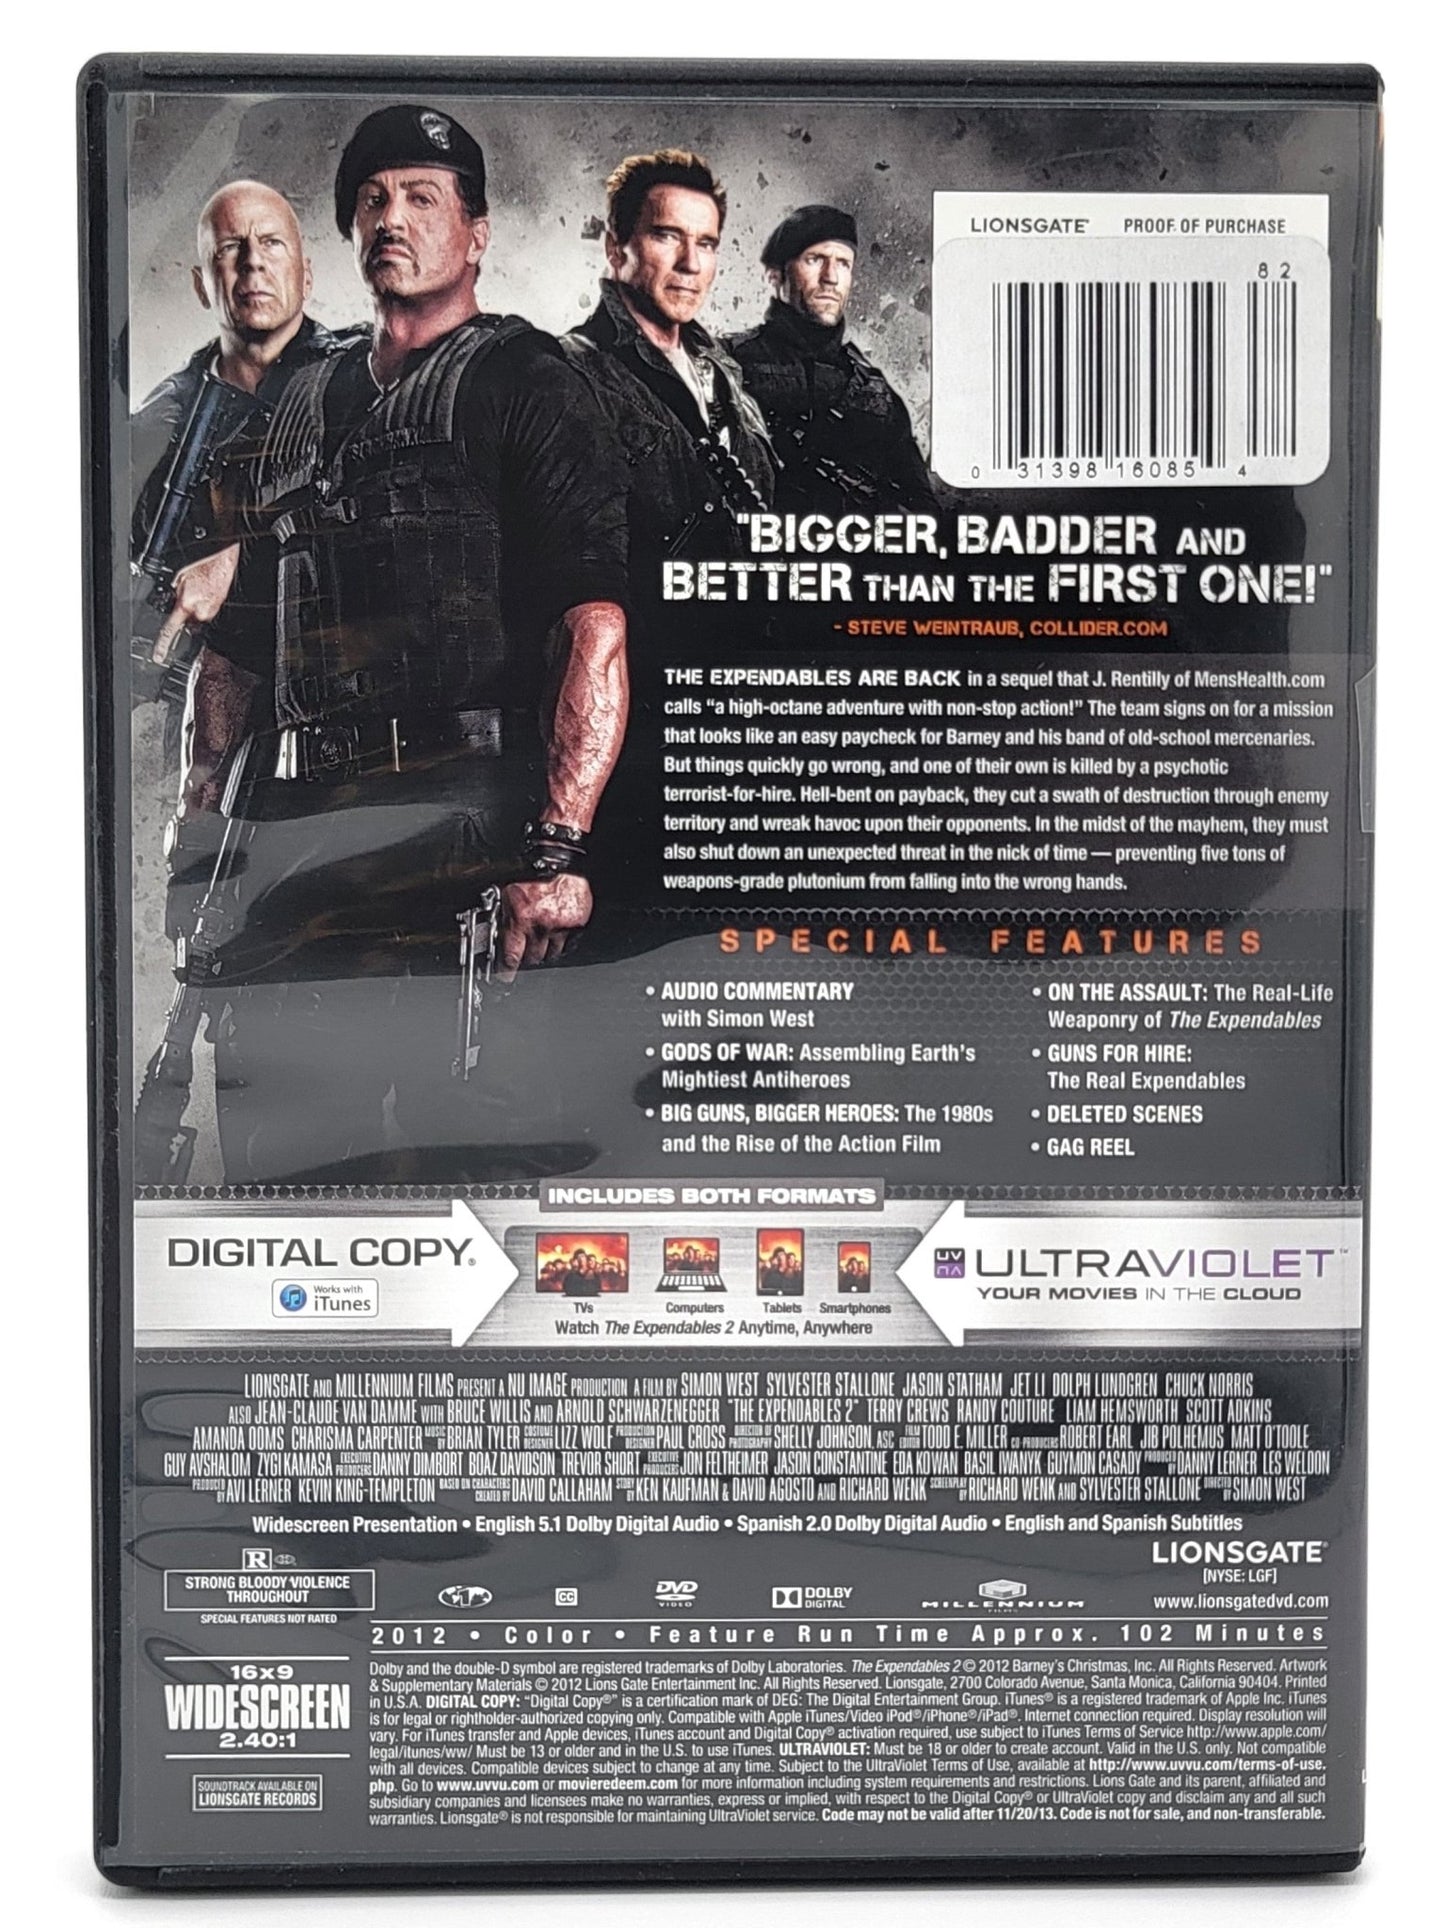 Lions Gate Films Inc. - The Expendable 2 | DVD | Widescreen - No Digital Copy - DVD & Blu-ray - Steady Bunny Shop